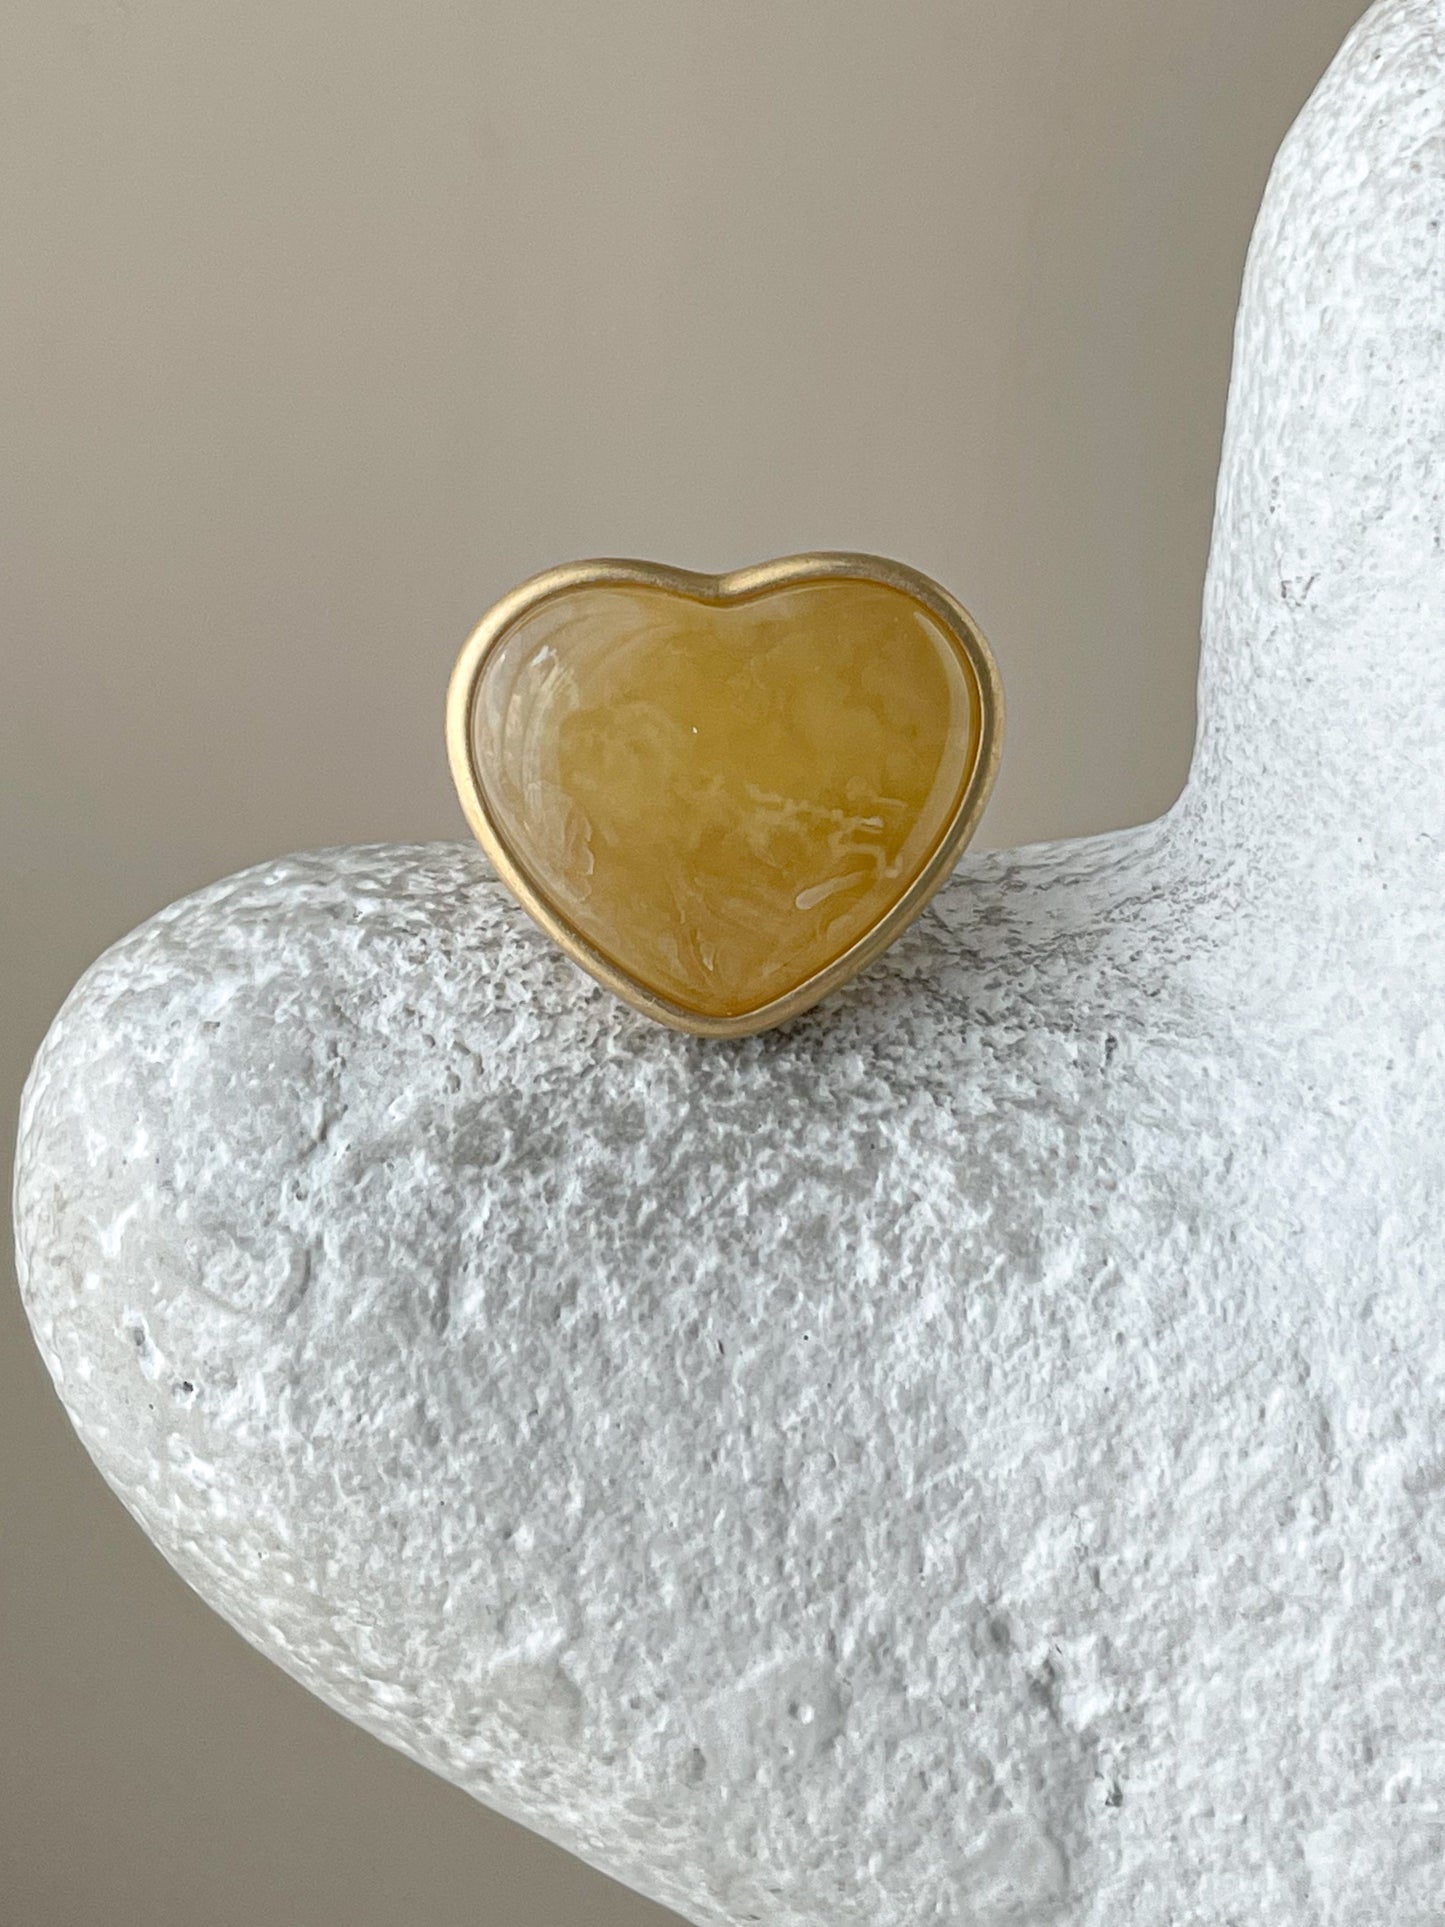 Amber heart ring - Gold plated Silver - Heart ring collection - Size 6 3/4